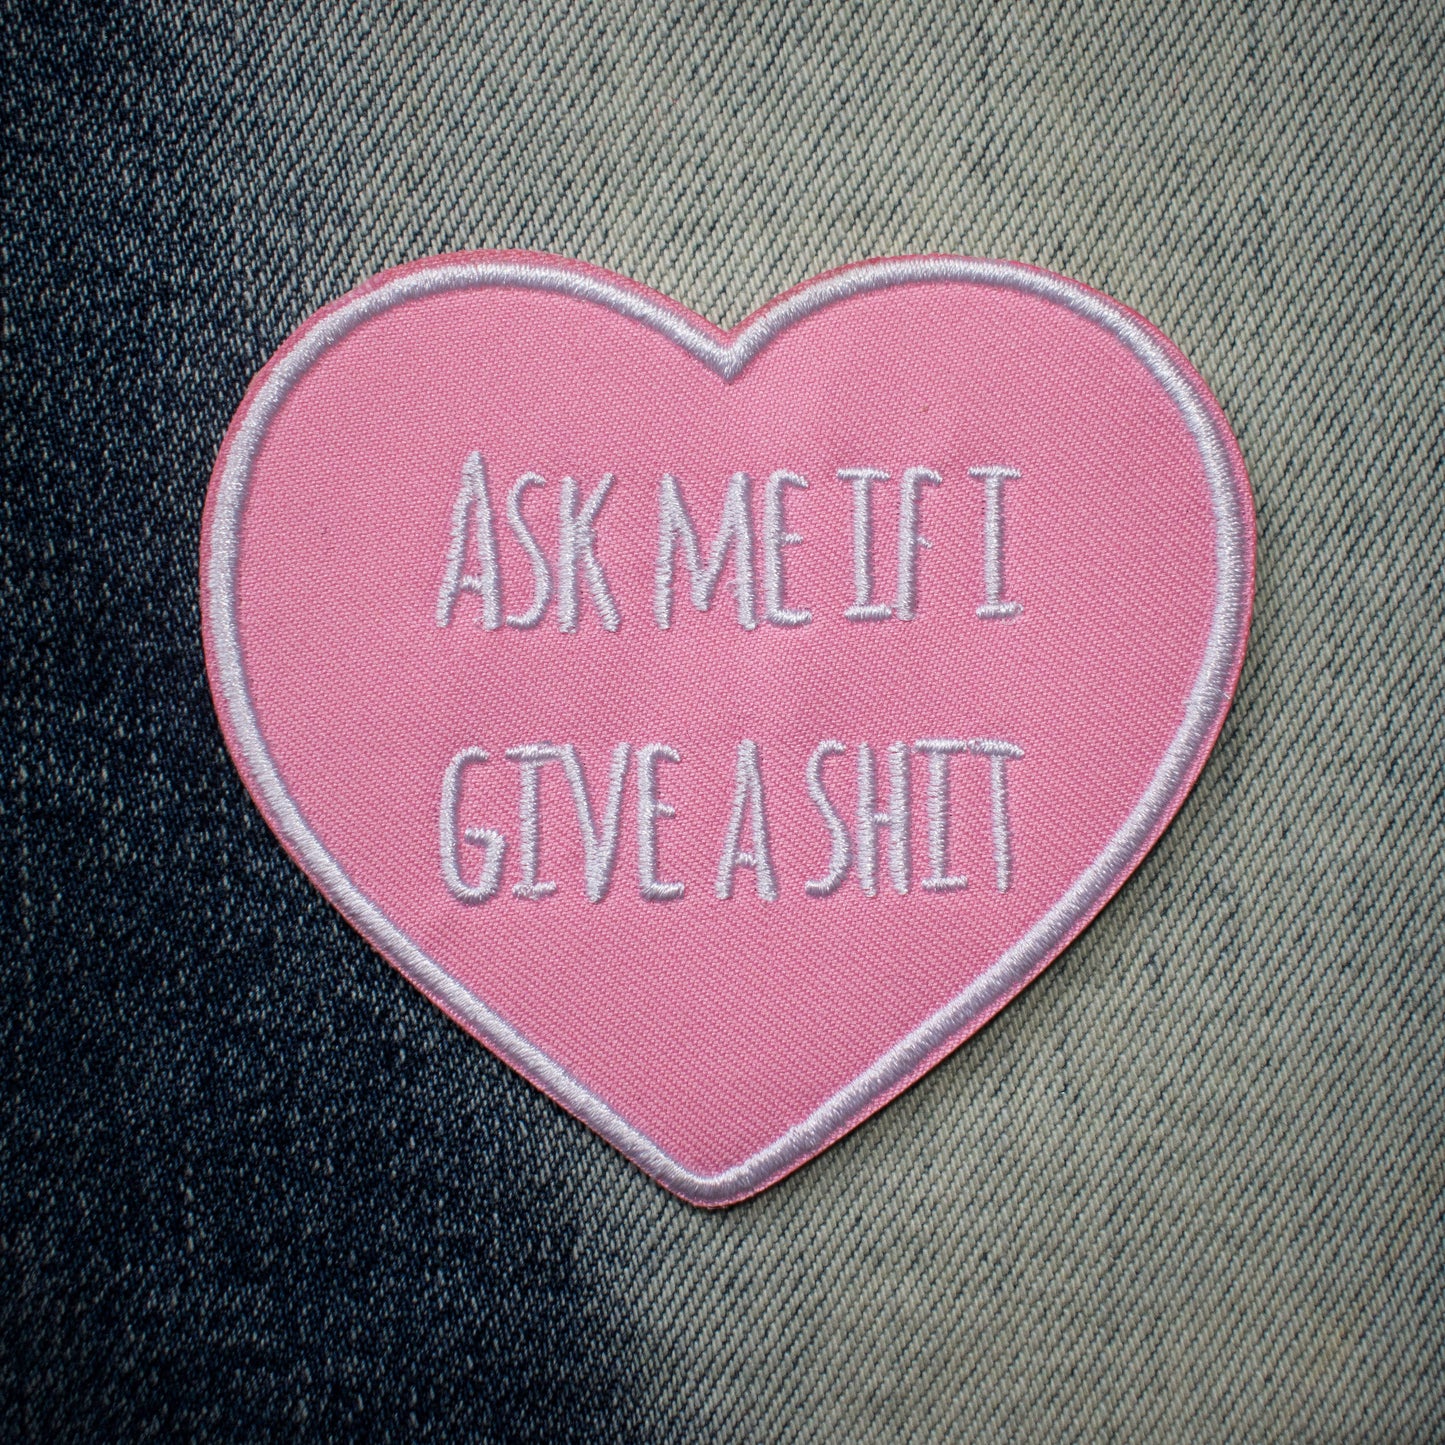 Ask Me Embroidered Patch